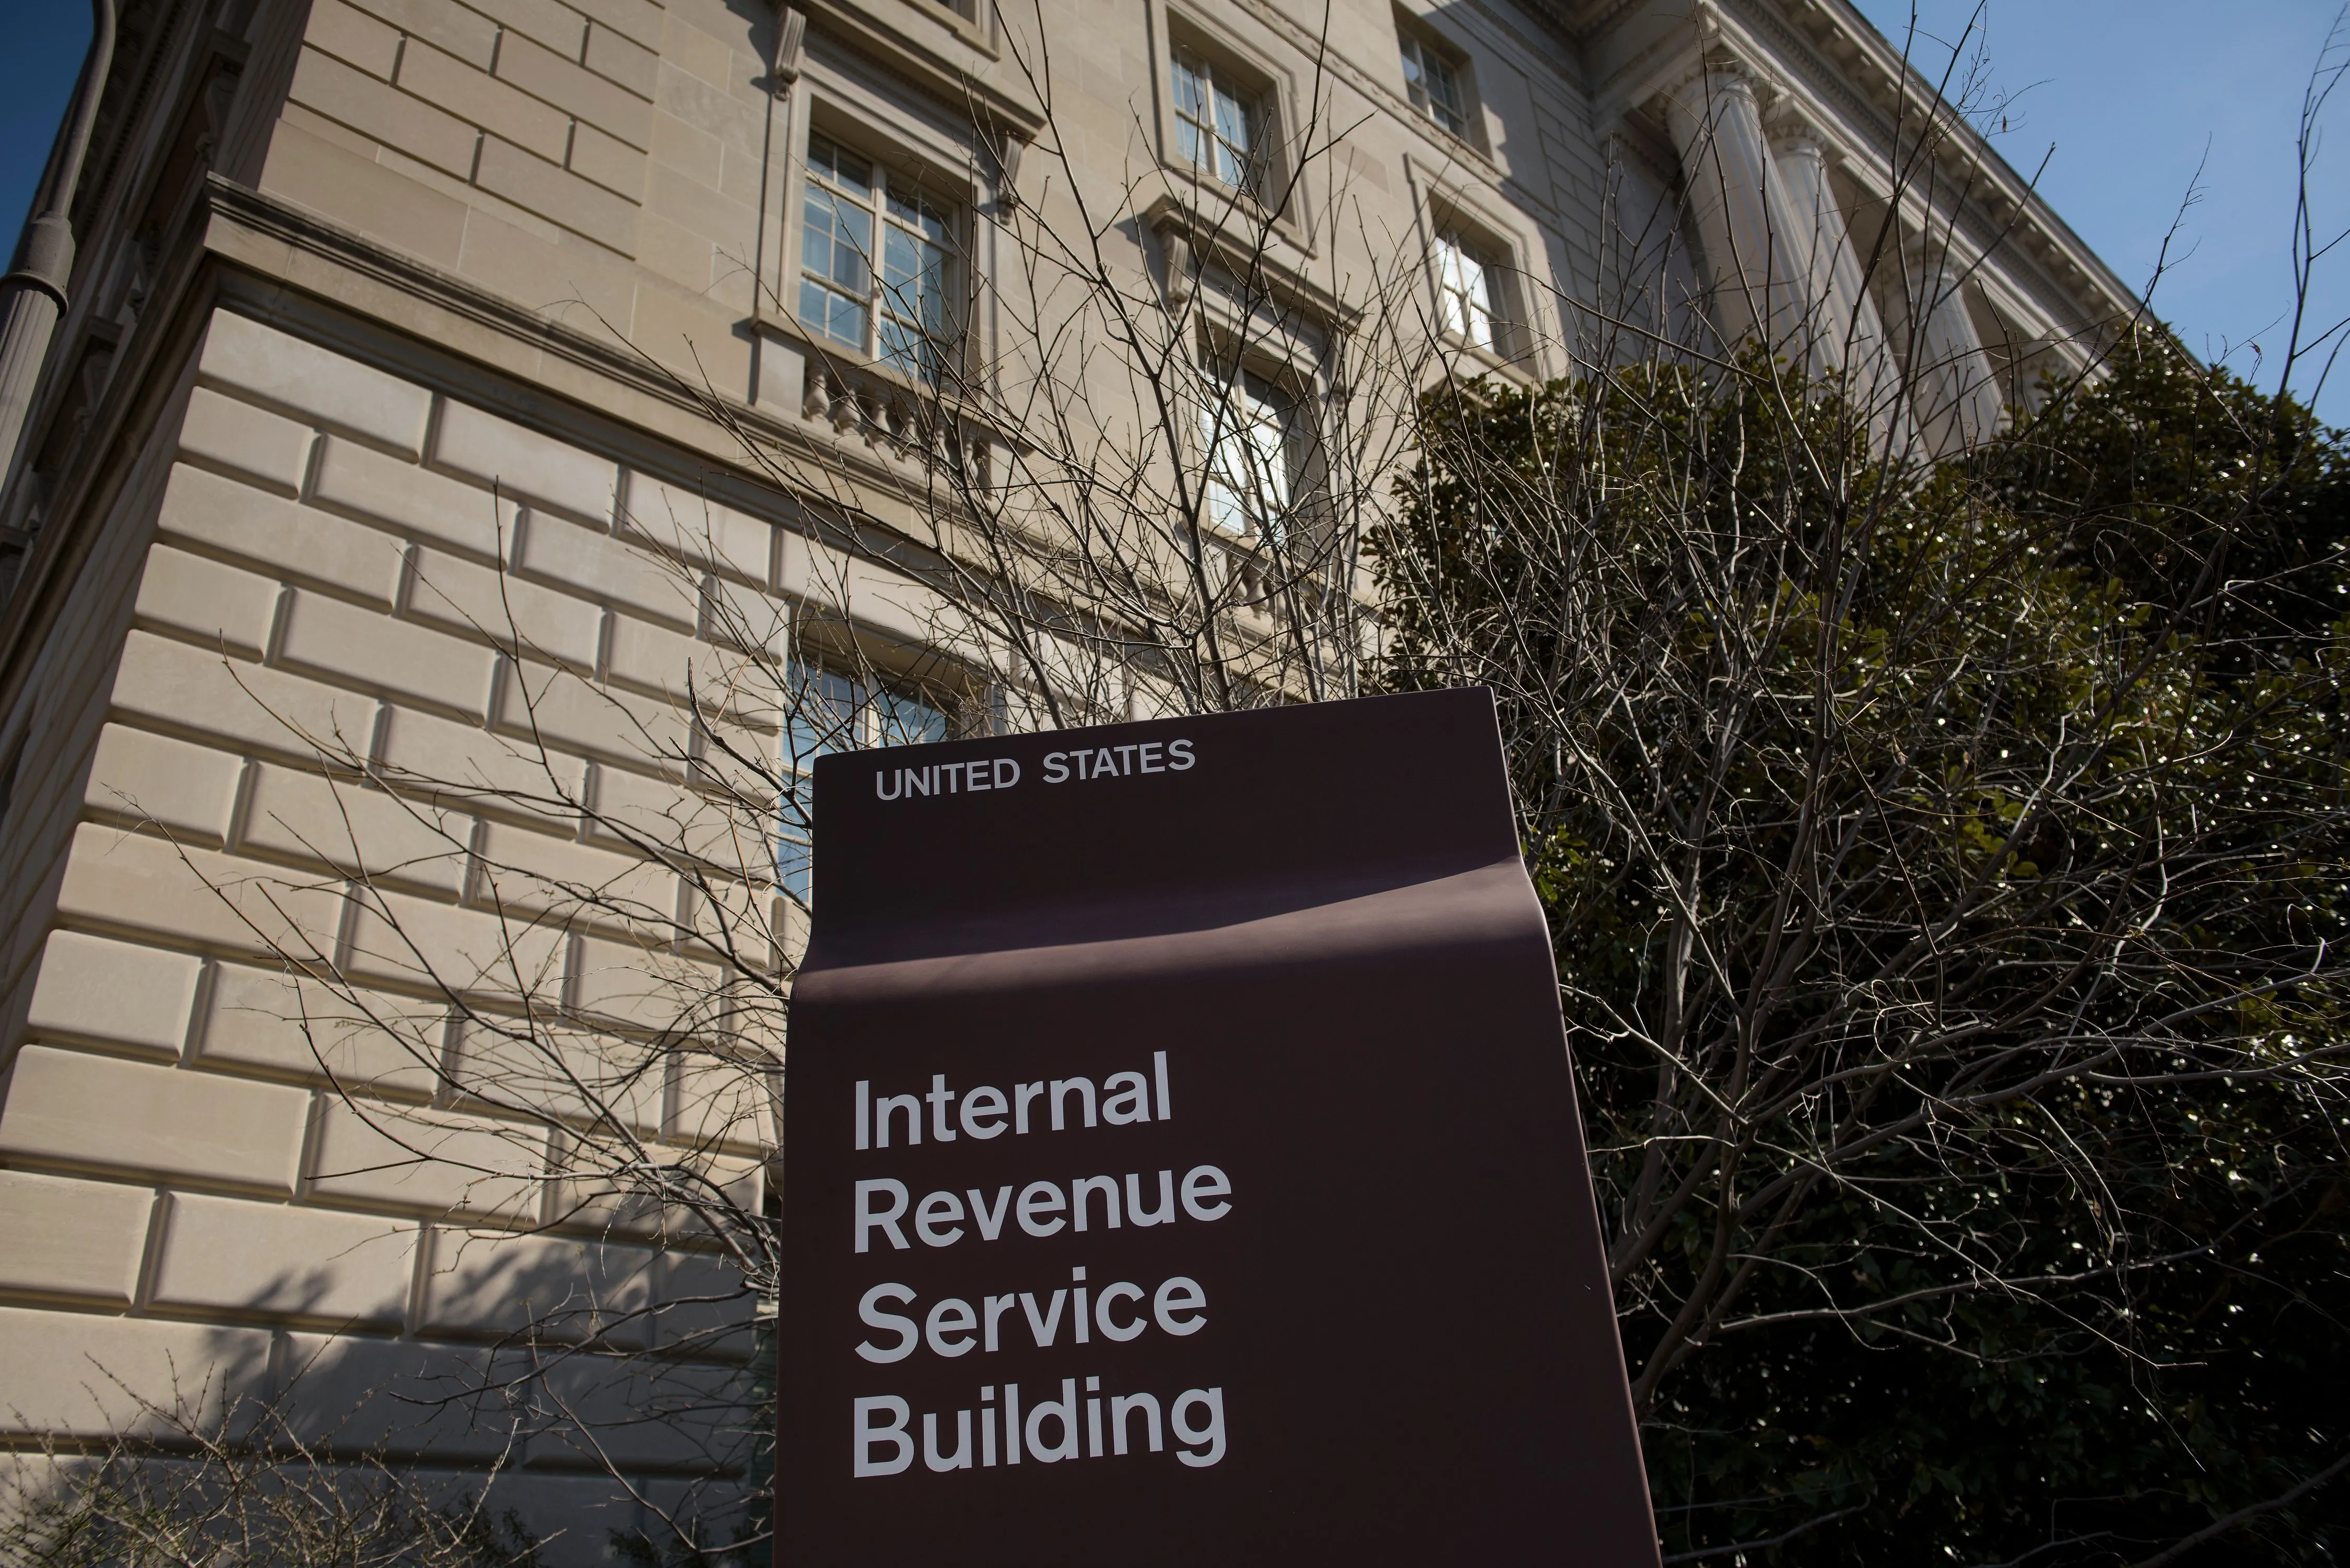 Every Retiree Should Make This Tax Move Right Now, According to a New Warning From the IRS